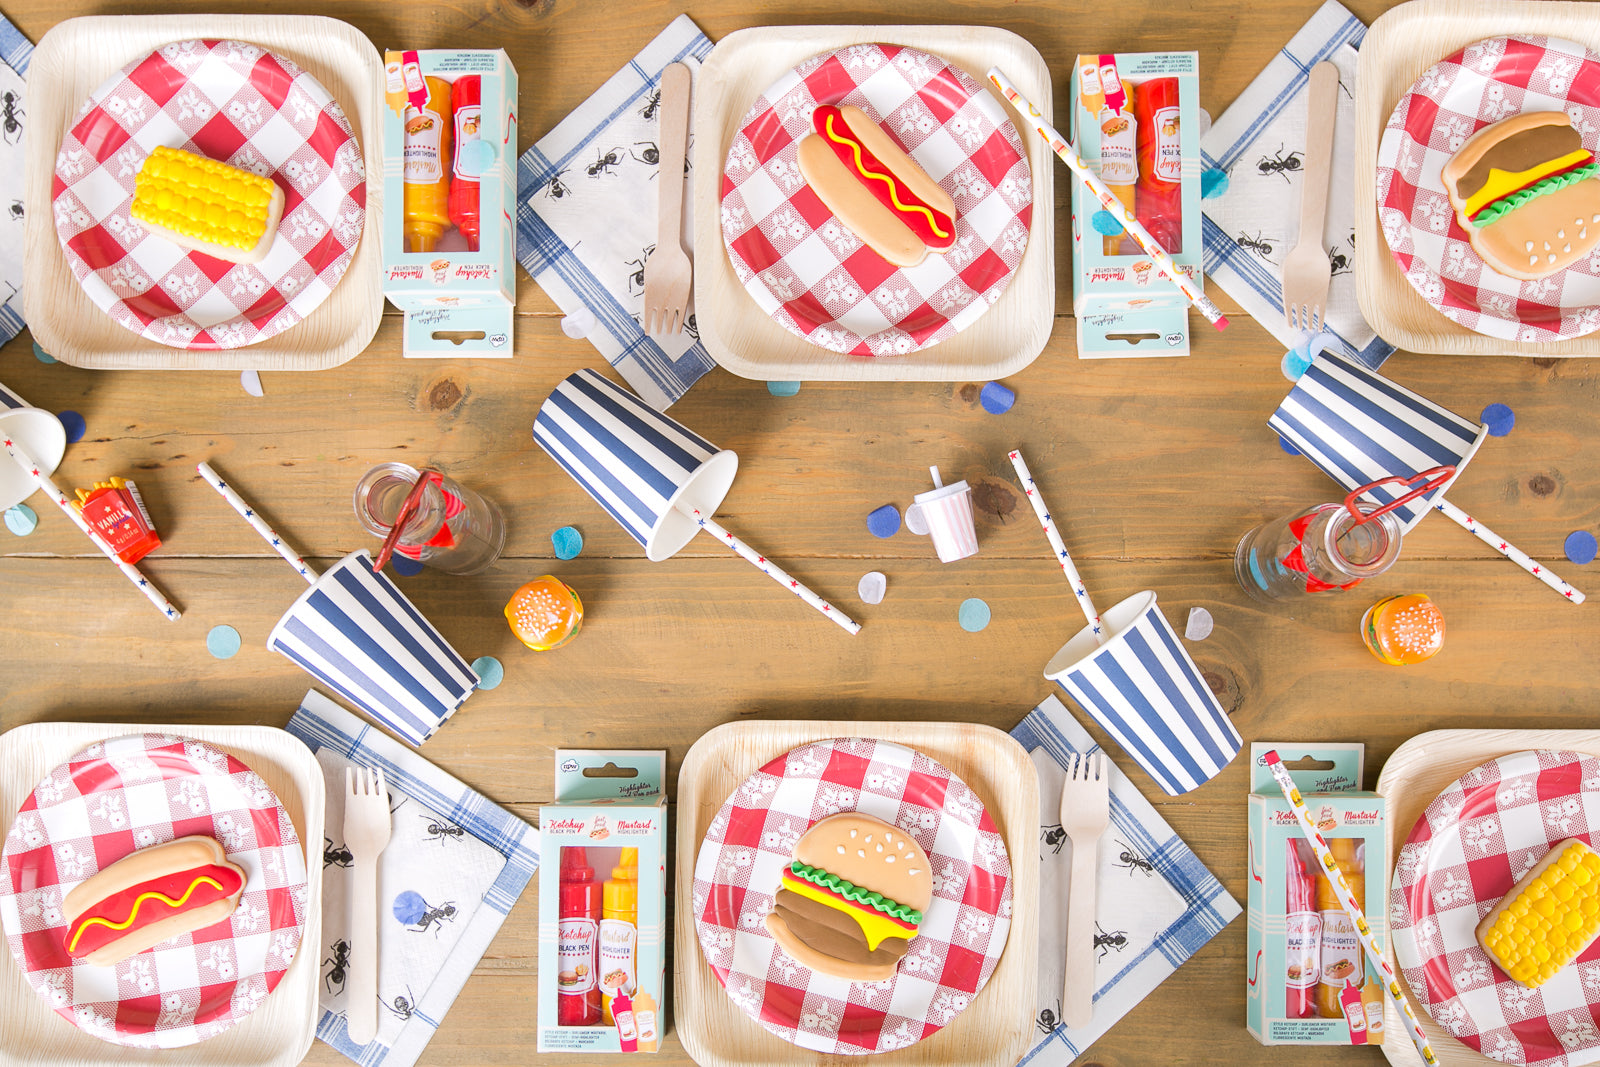 Barbecue party supplies and tablescape ideas.